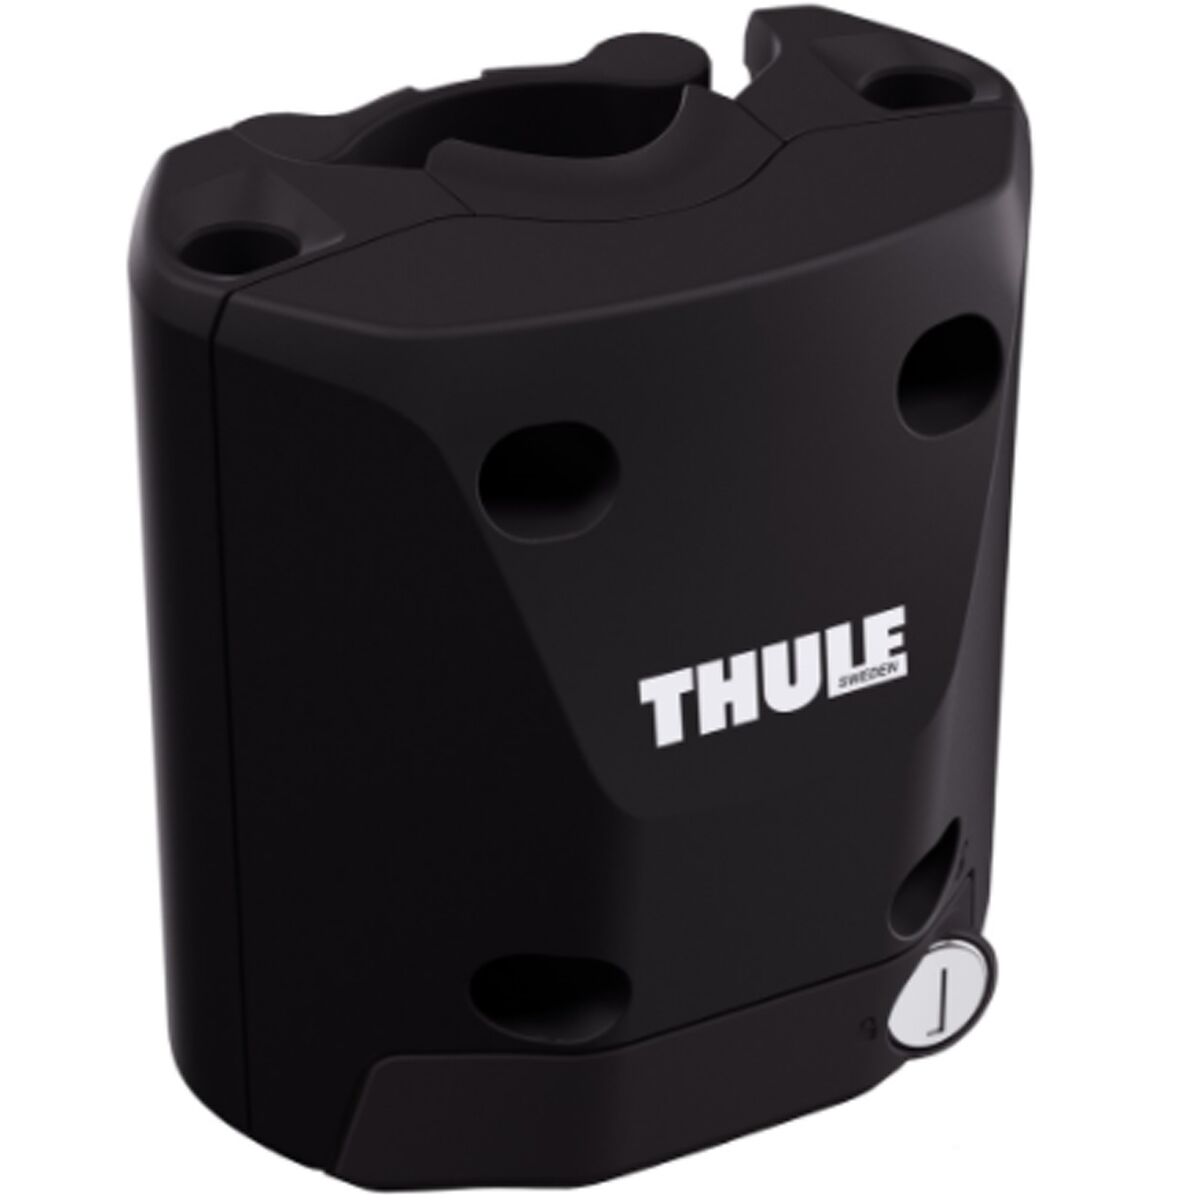 Thule Chariot Quick Release Bracket